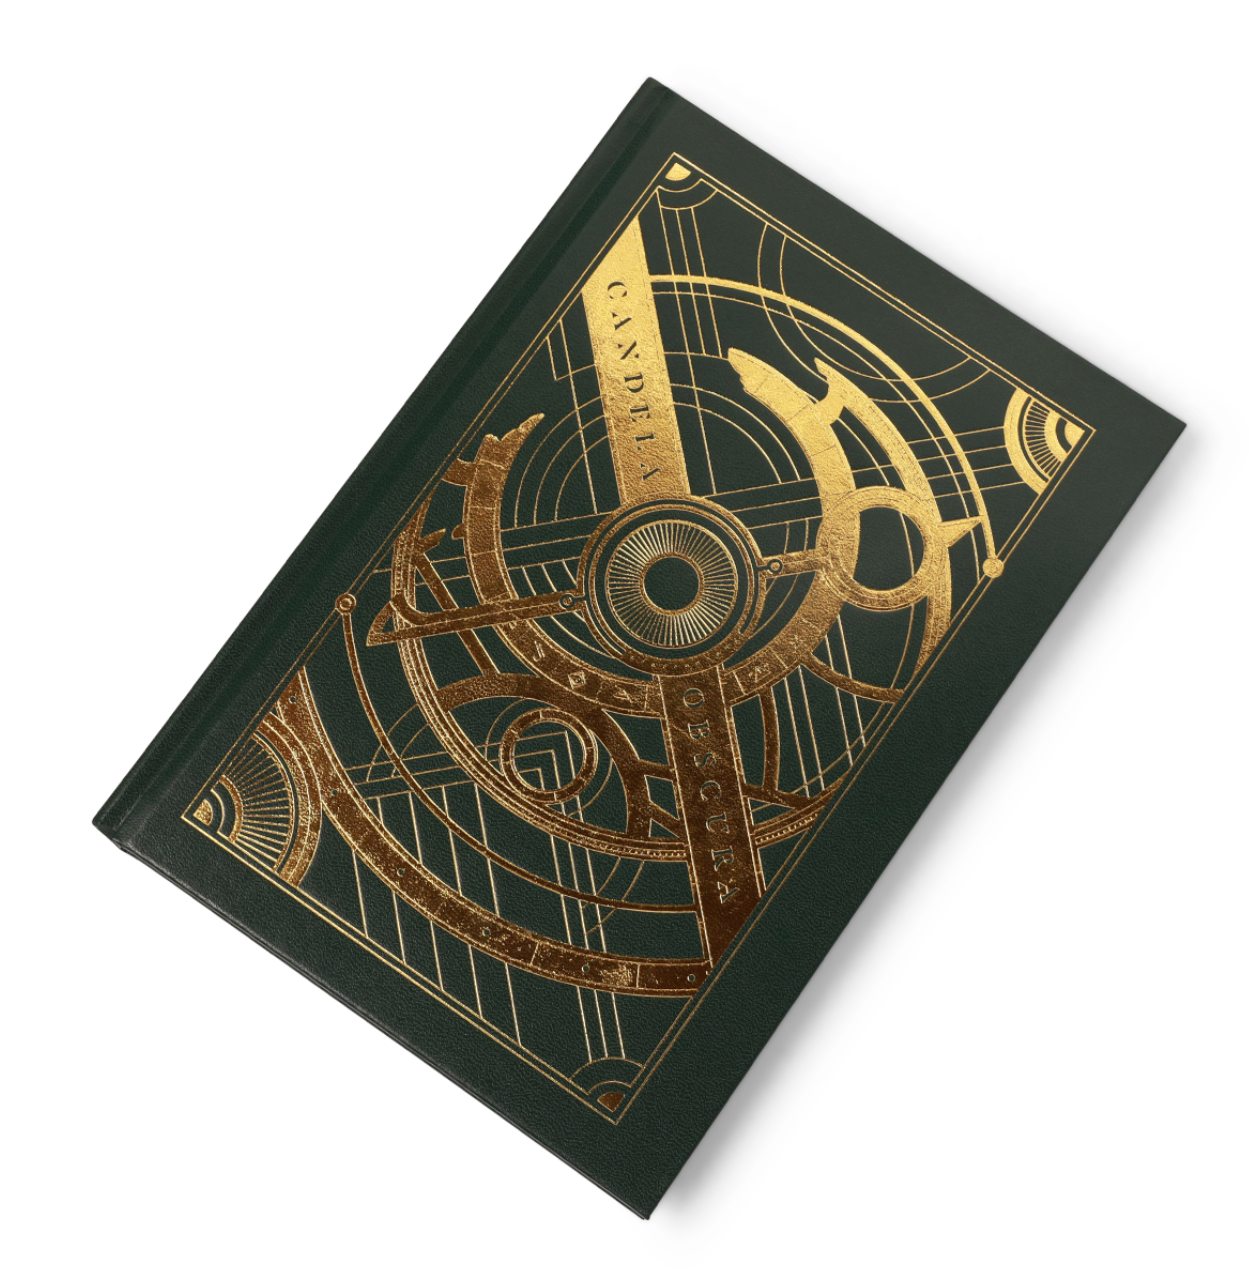 Candela Obscura Core Rulebook - Limited Edition